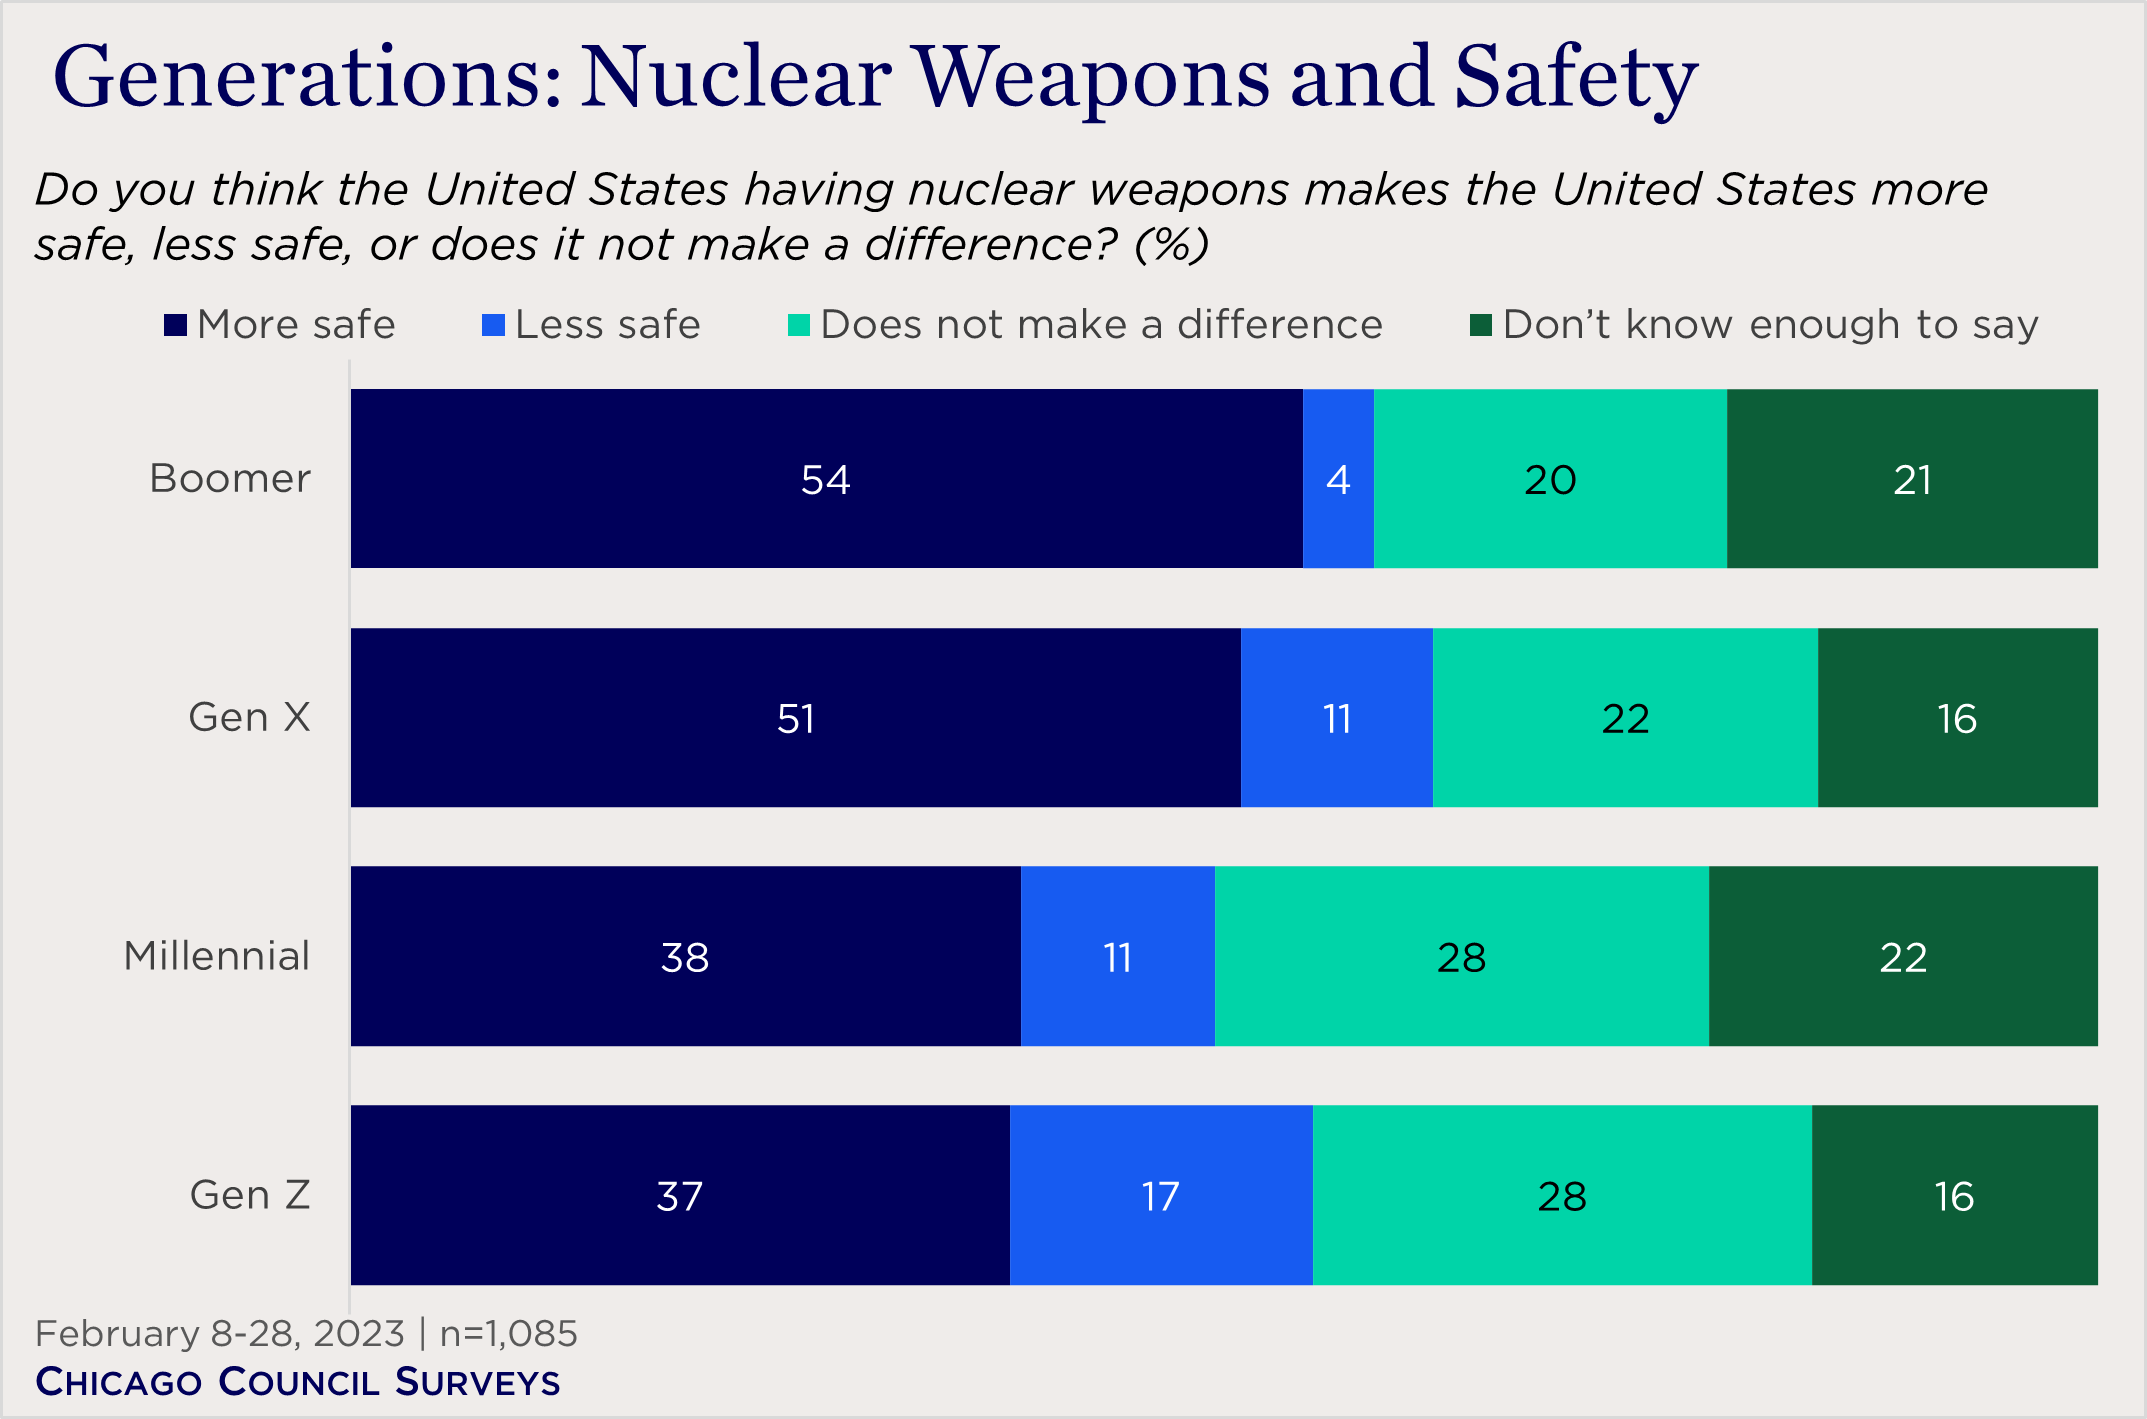 "bar chart showing generational views on nuclear weapons and safety"